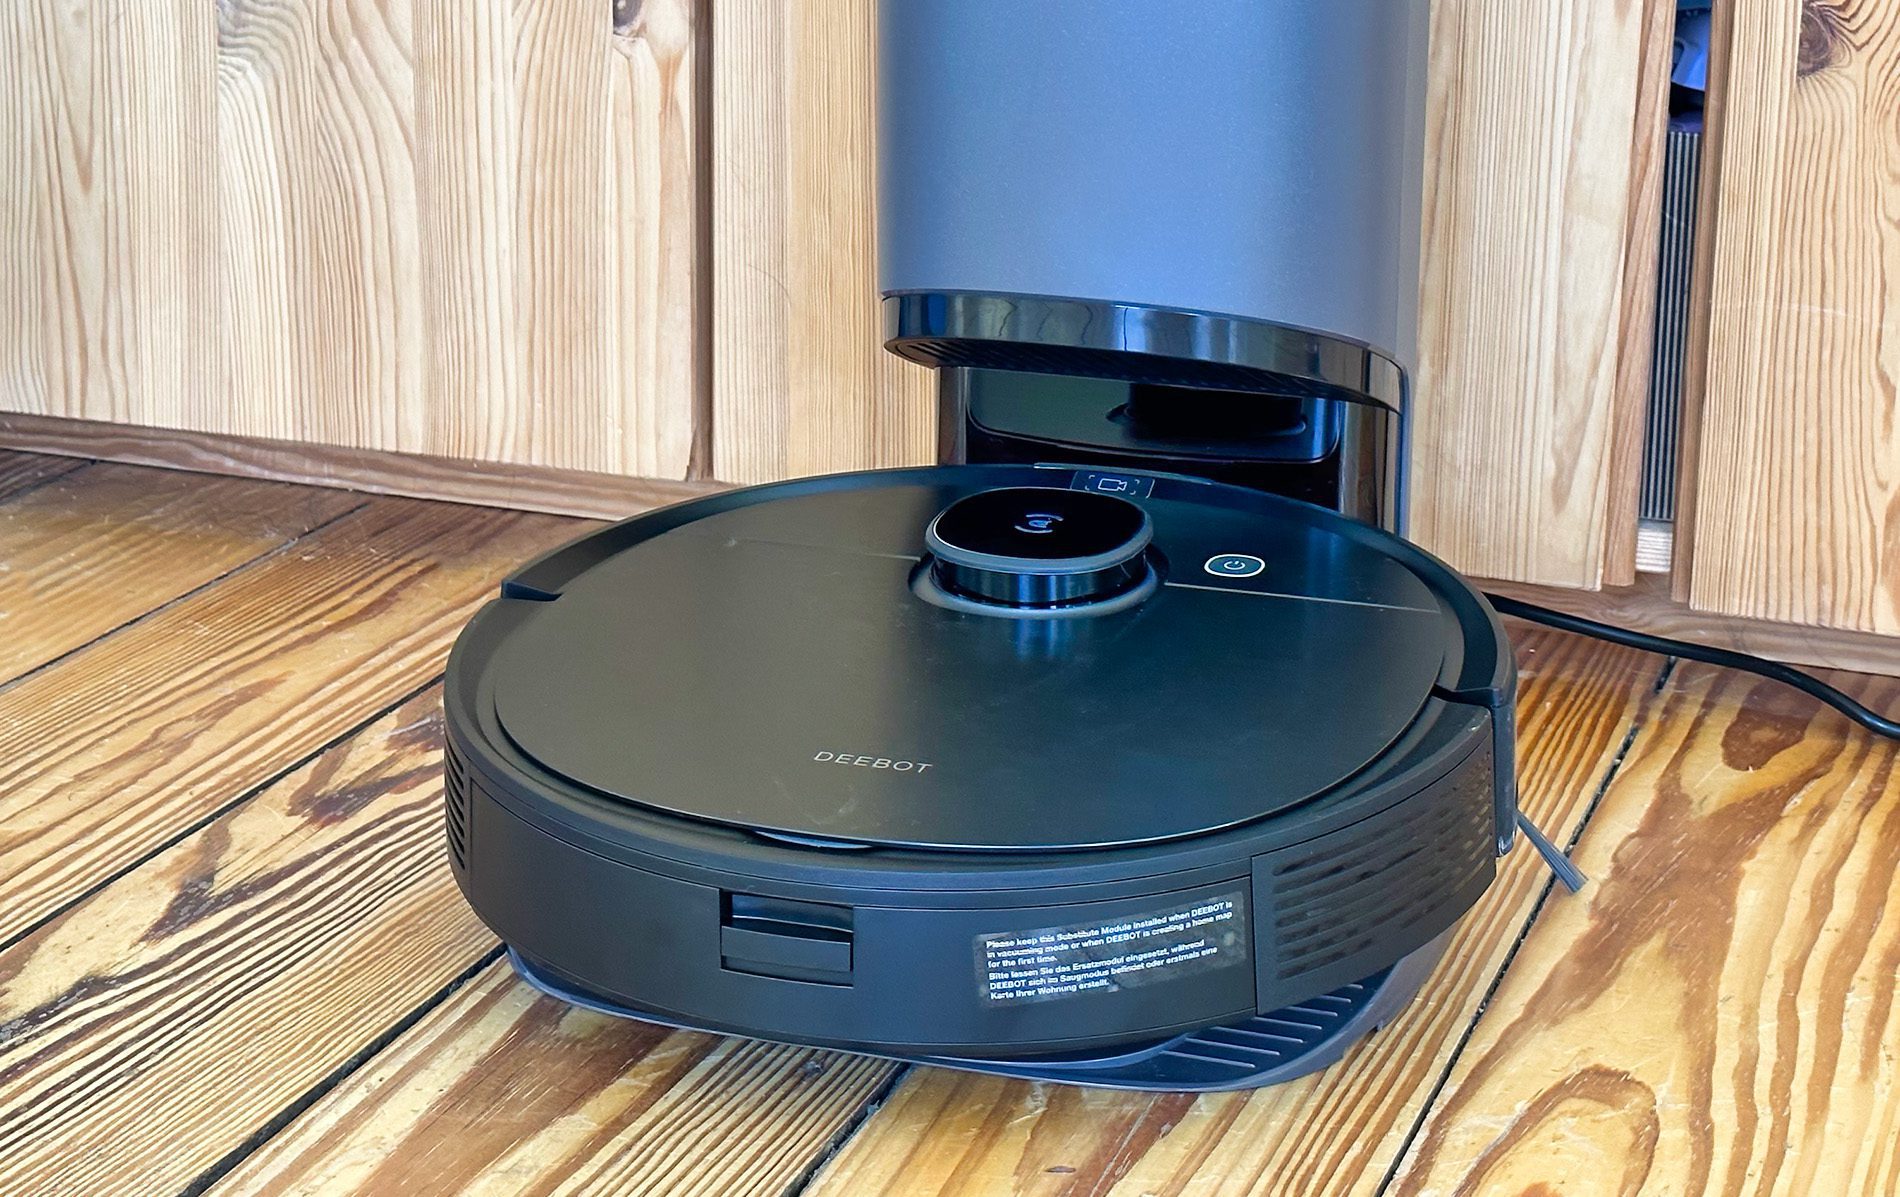 The Ecovacs T9 AIVI robot vacuum is a robust and well-functioning device, but I miss the option for it to drive to the dock to be emptied after a certain period of time.